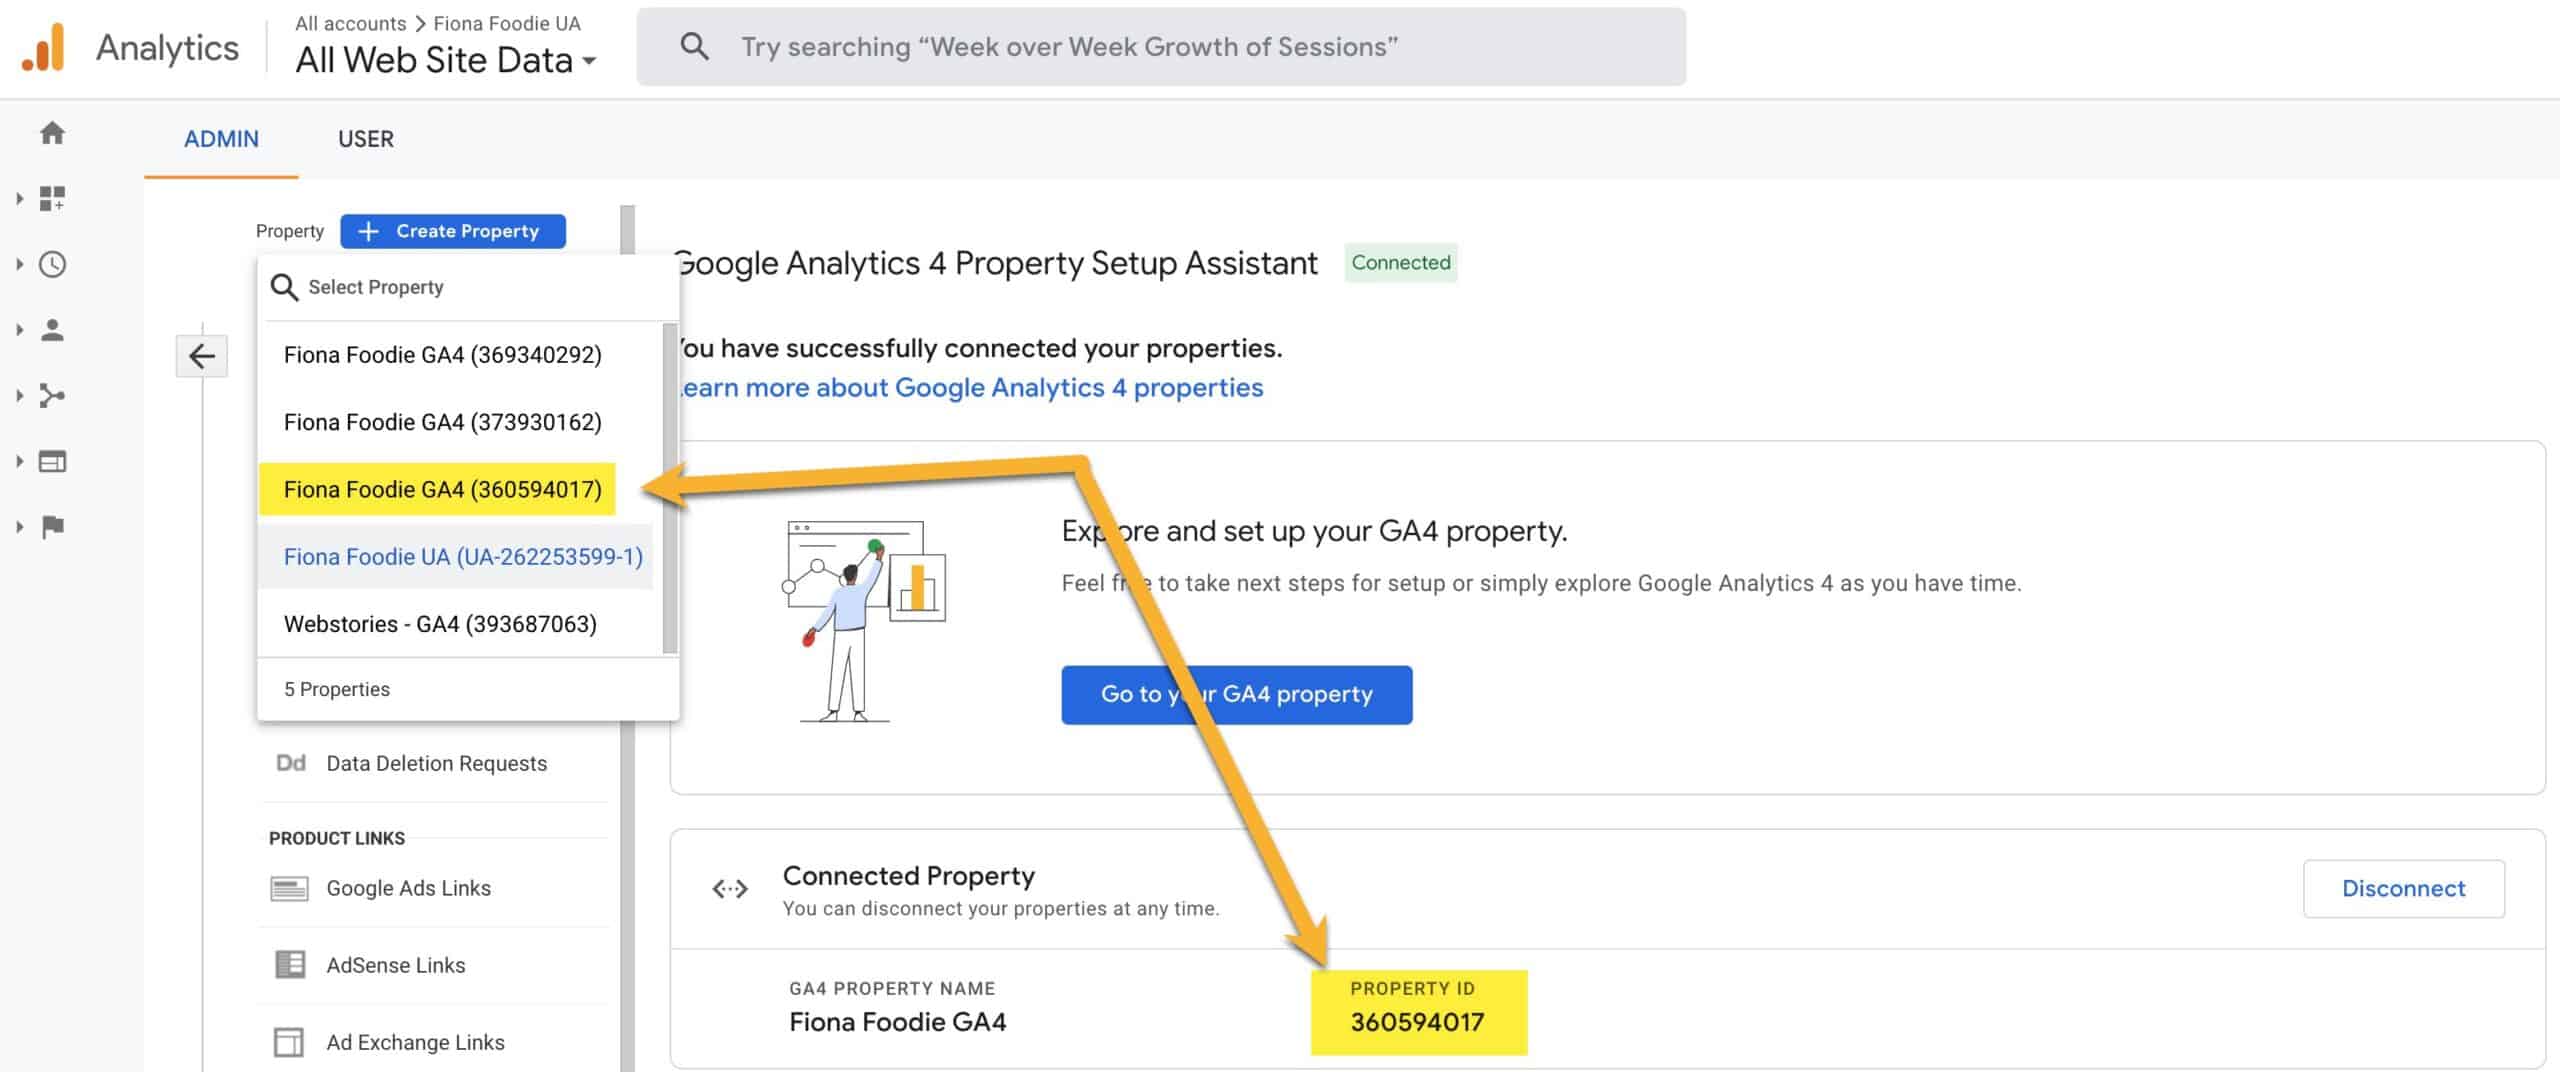 Google Analytics dashboard showing how to switch to a different property within an account.